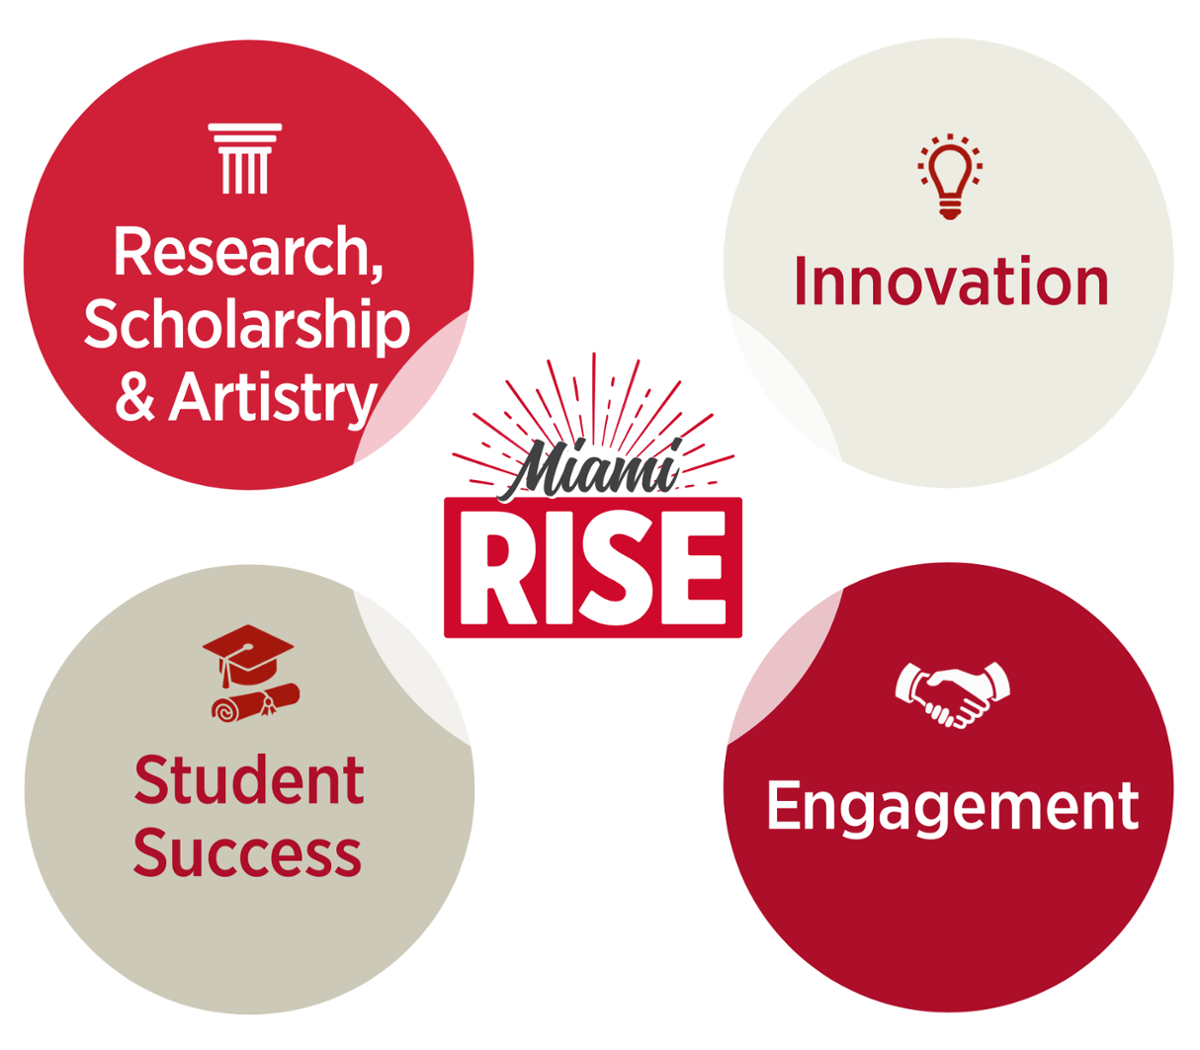 Four circles around the Miami RISE graphic: Research, Scholarship, and Artistry, Innovation, Student Success, and Engagement